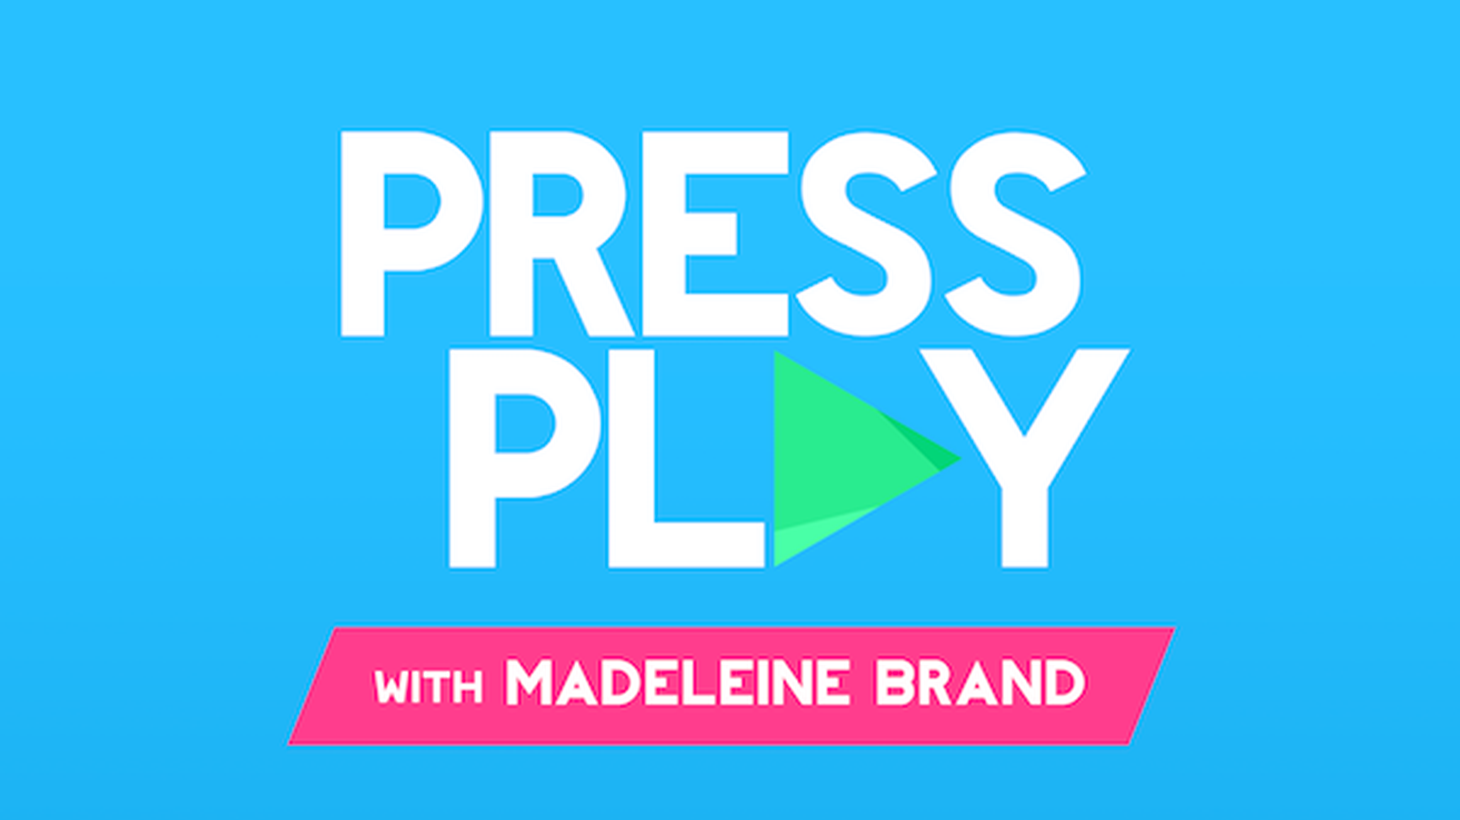 Today on Press Play: The realities of a U.S./China climate pact, an investigation into dangerous pesticides used around population centers, and why Bill Cosby shouldn’t have tried to use the internet to promote himself.